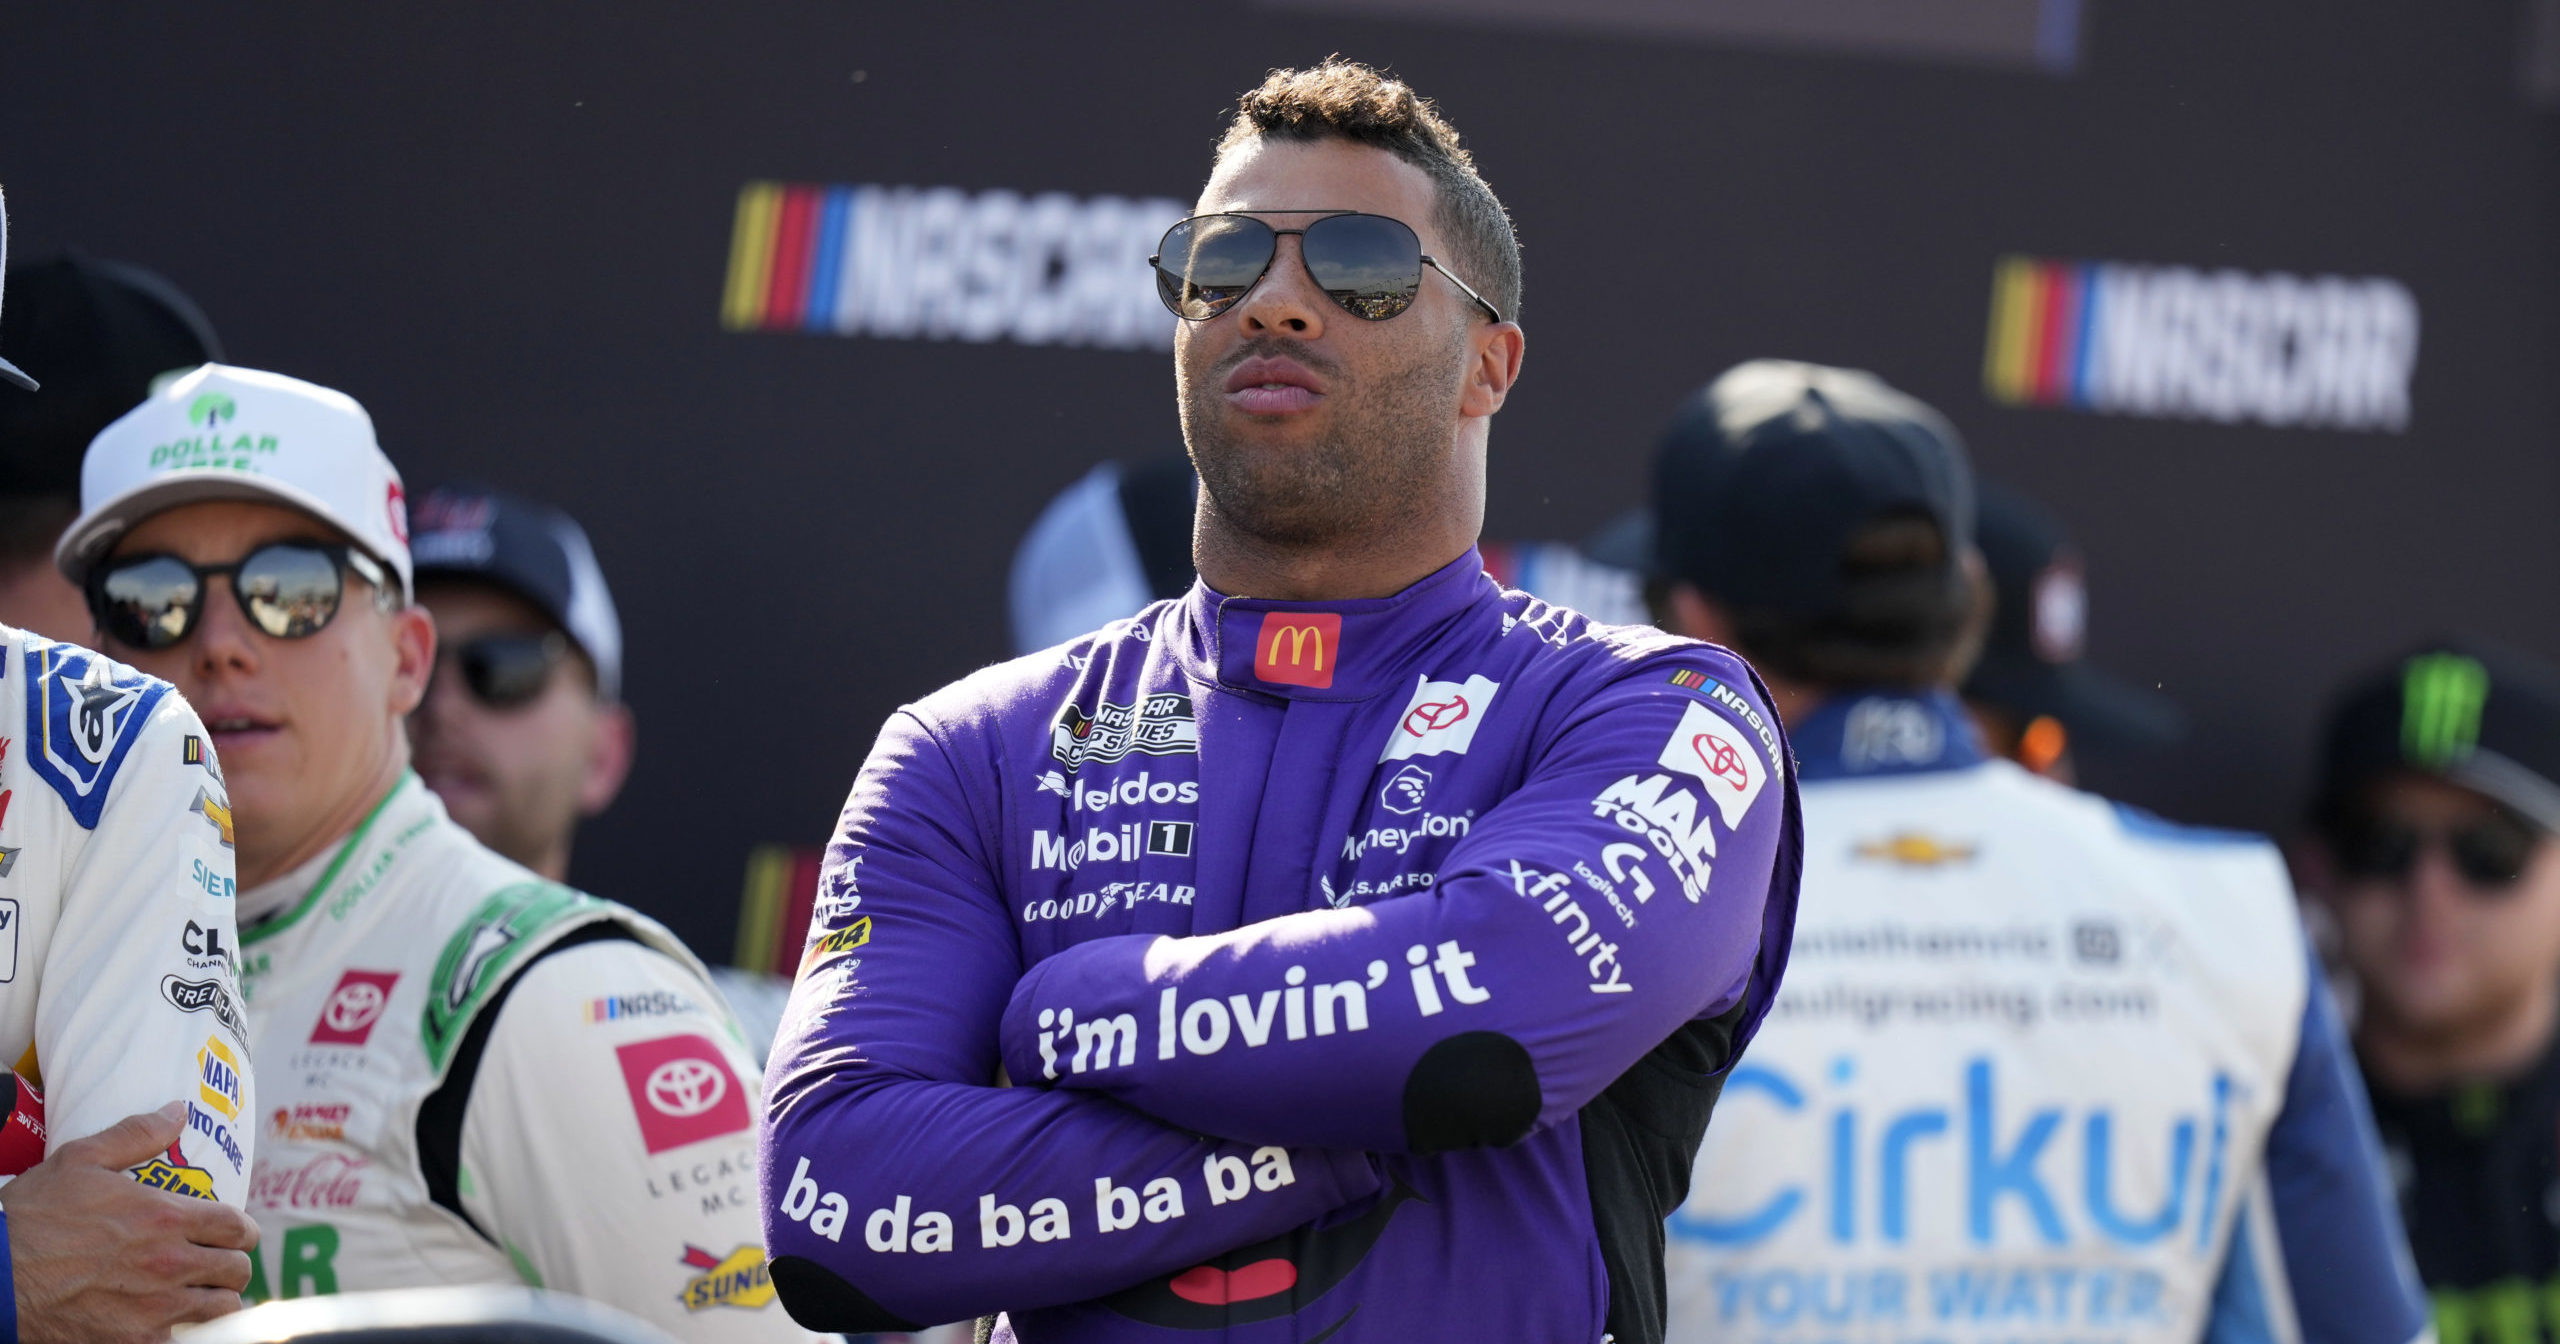 Bubba Wallace Slapped with ,000 NASCAR Fine for Behavior on Cooldown Lap